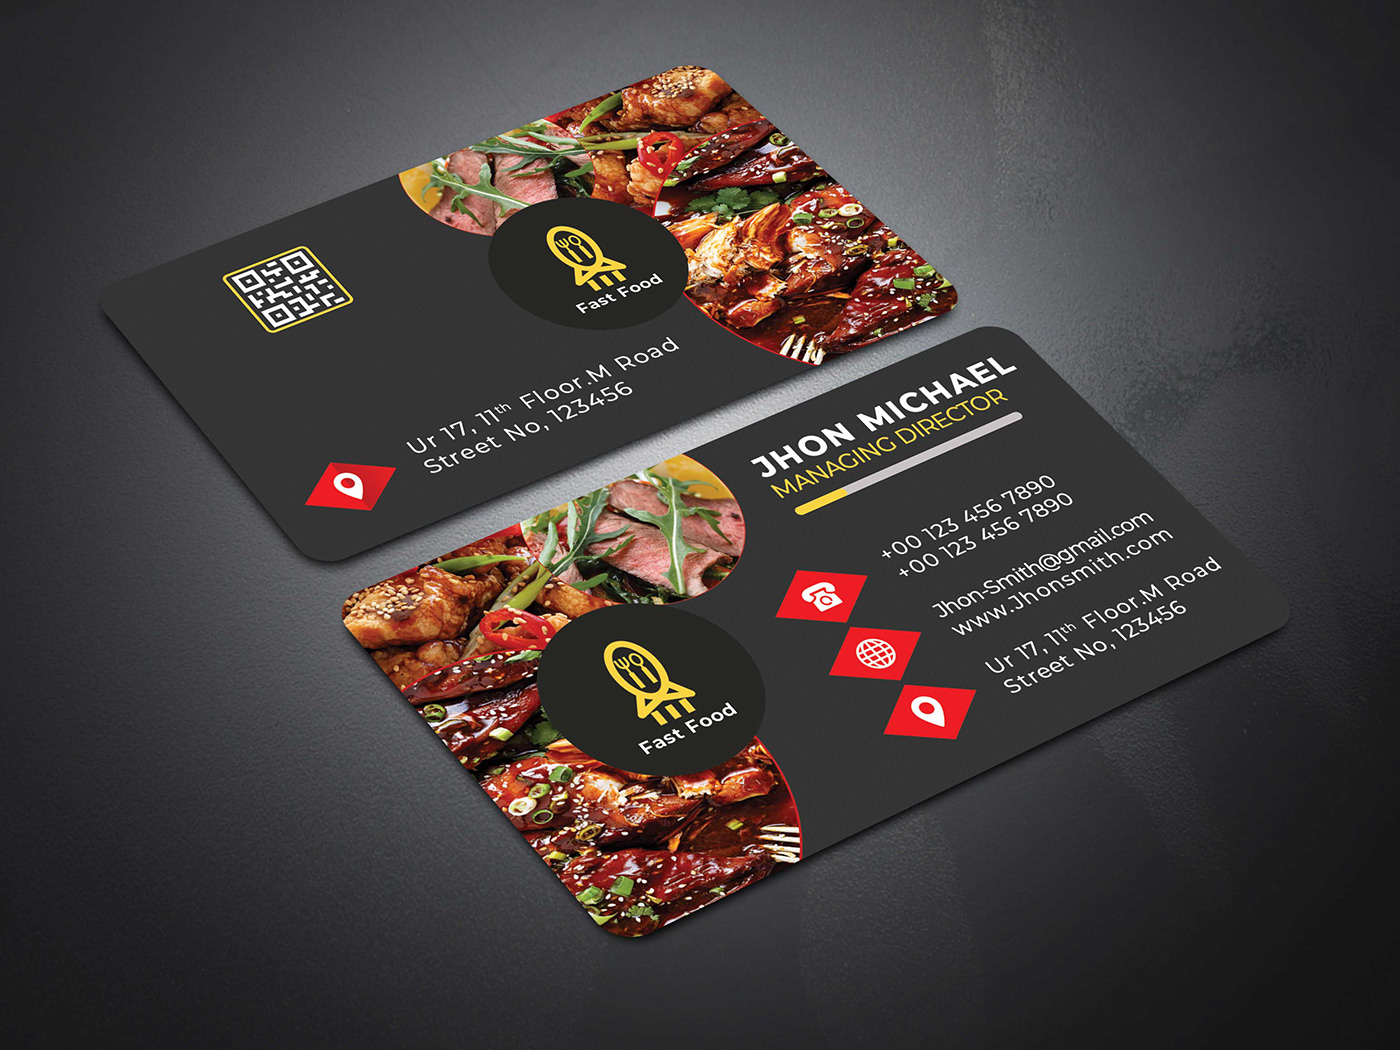 BAR BQ beef black burger caterer catering chef card  cookout food business card Creative Design